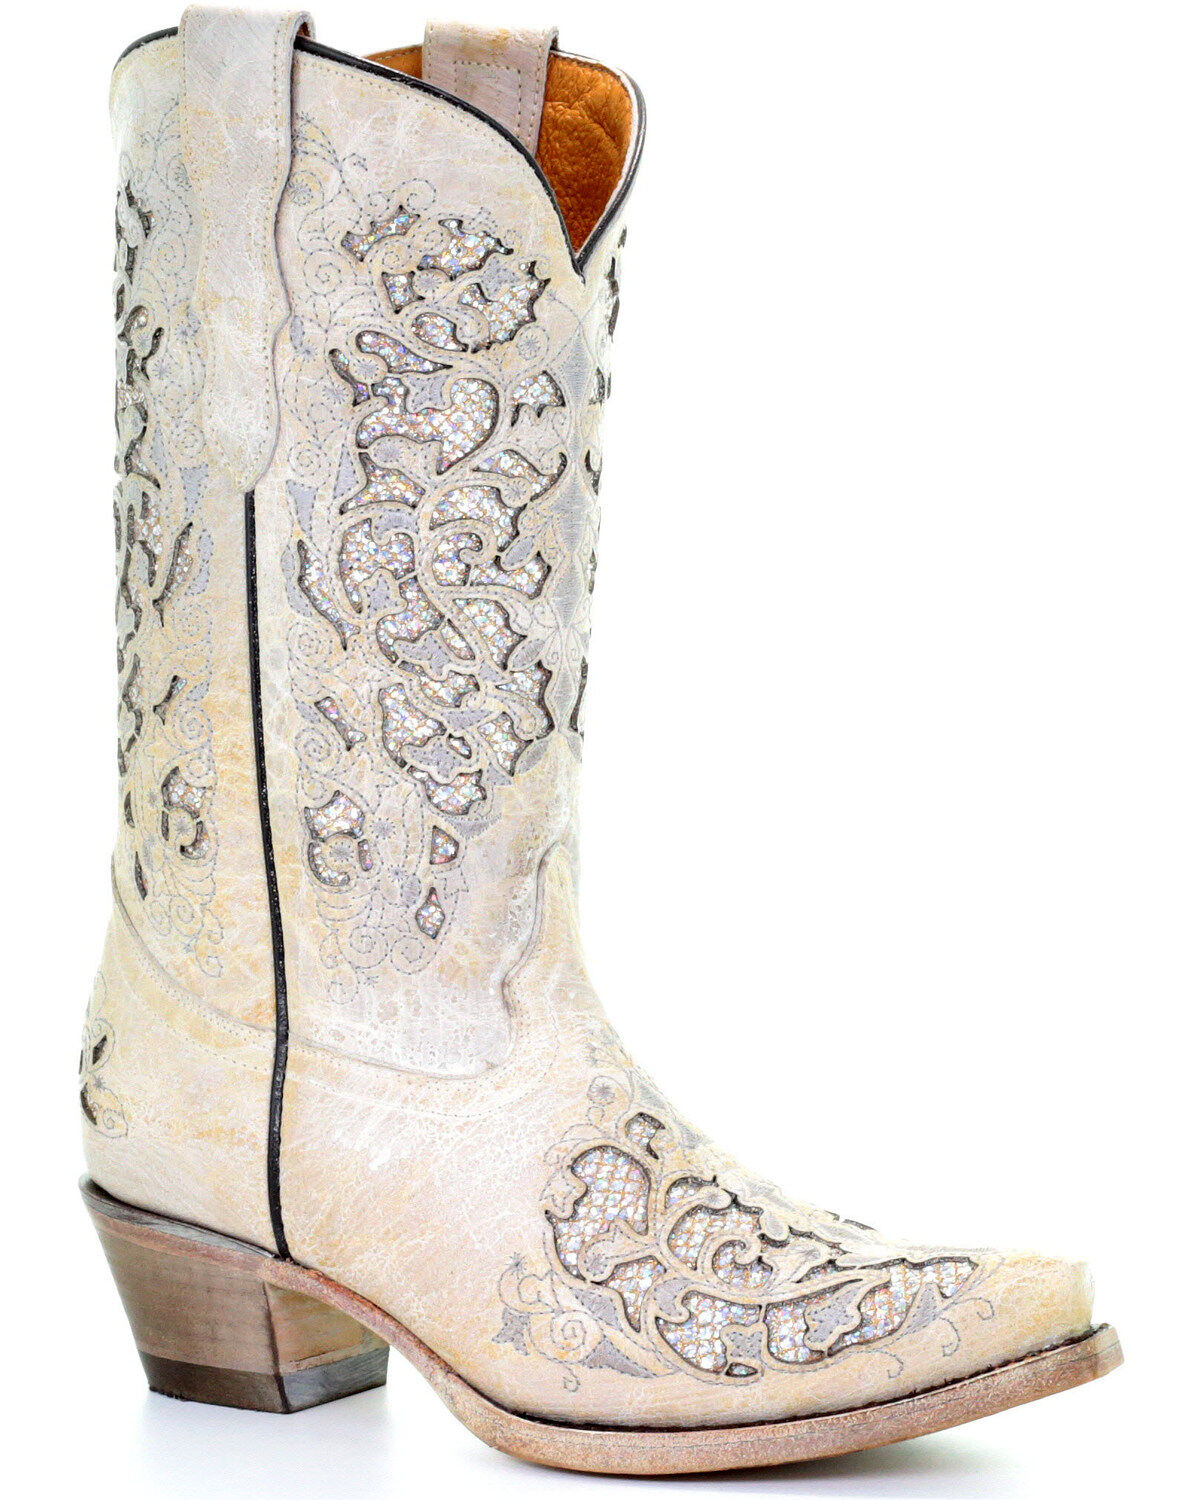 Girls' Cowgirl Boots